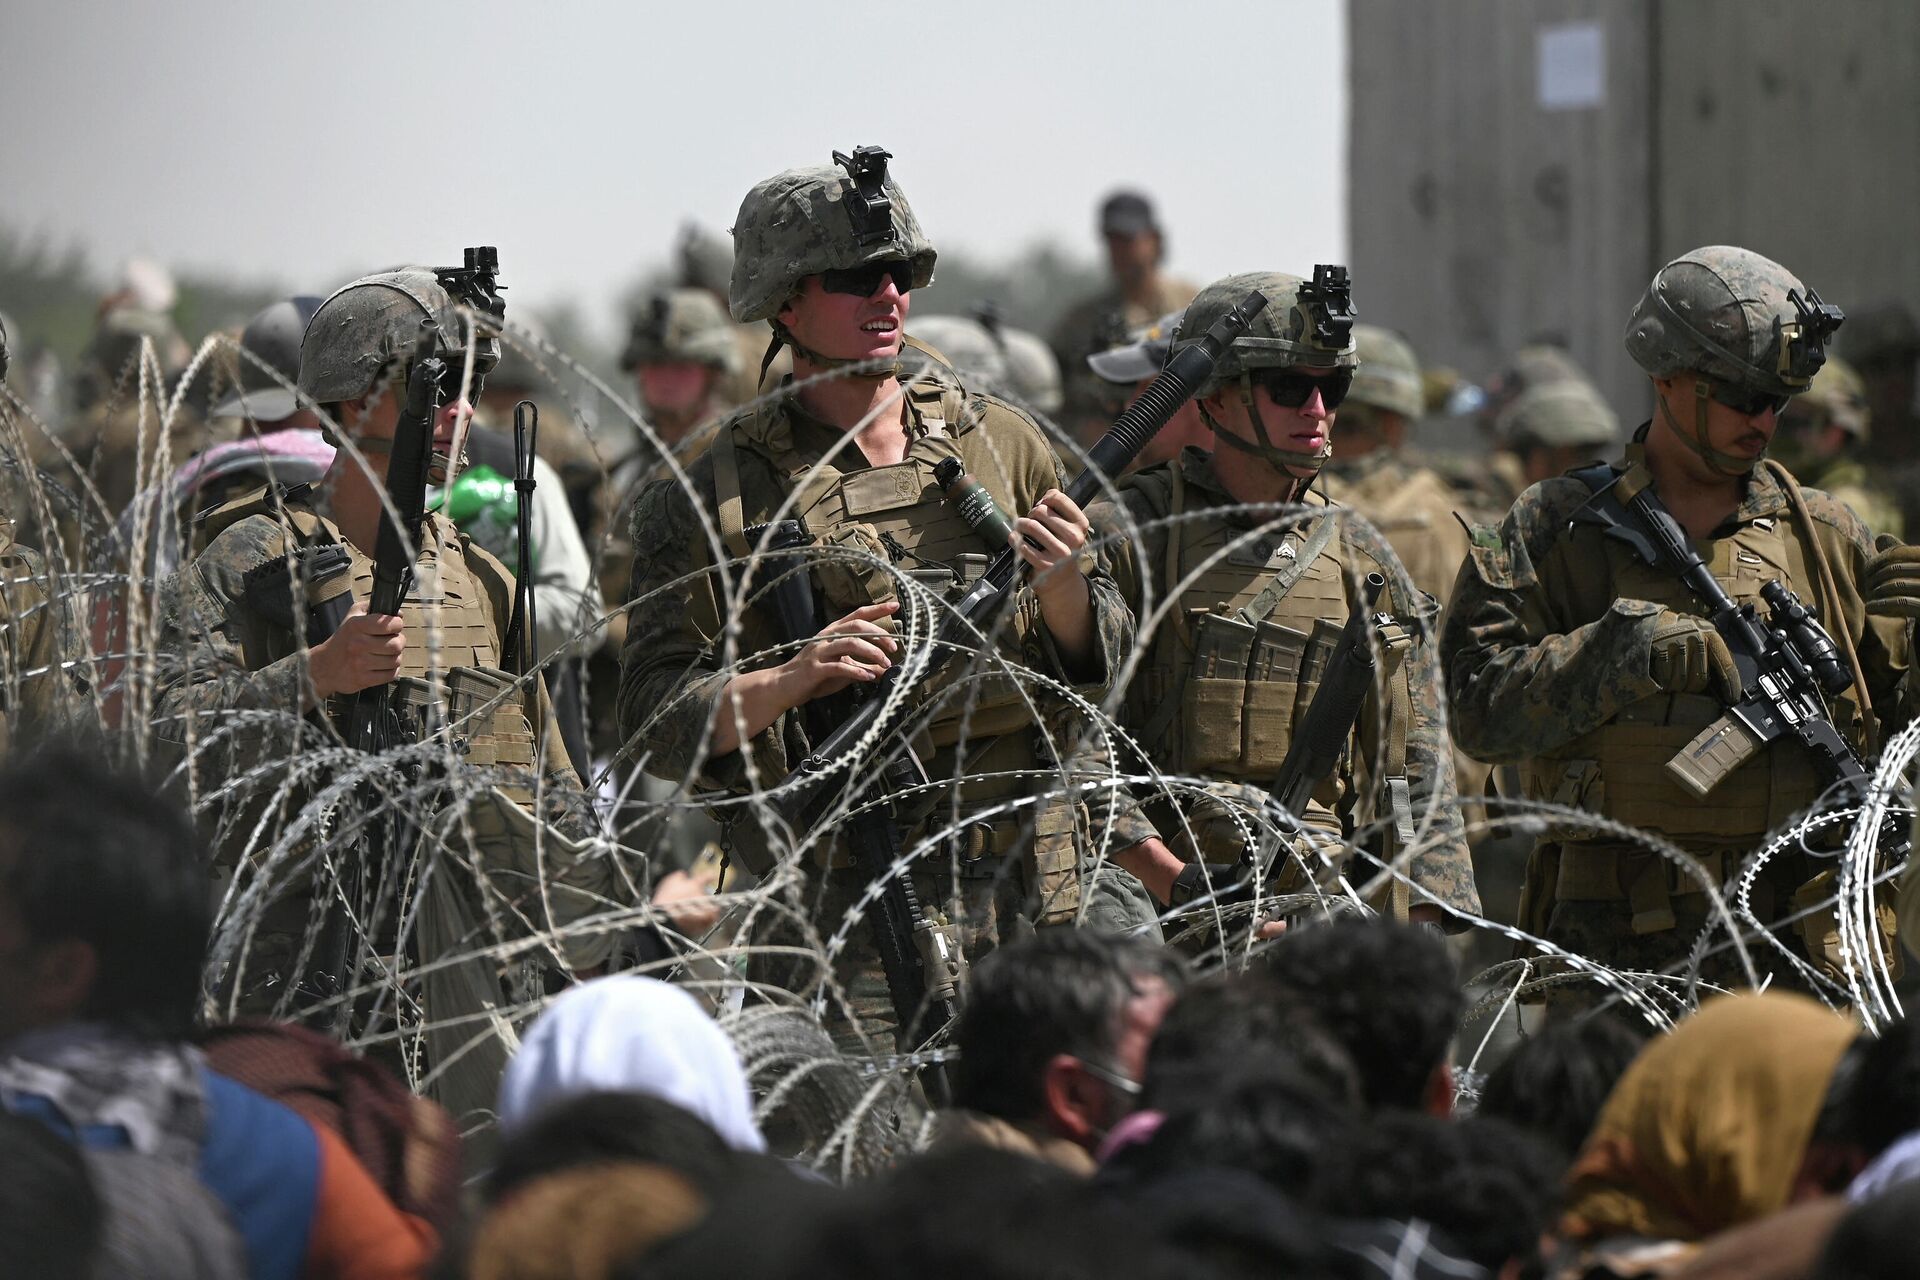 US soldiers stand guard behind barbed wire as Afghans sit on a roadside near the military part of the airport in Kabul on August 20, 2021, hoping to flee from the country after the Taliban's military takeover of Afghanistan - Sputnik International, 1920, 07.09.2021